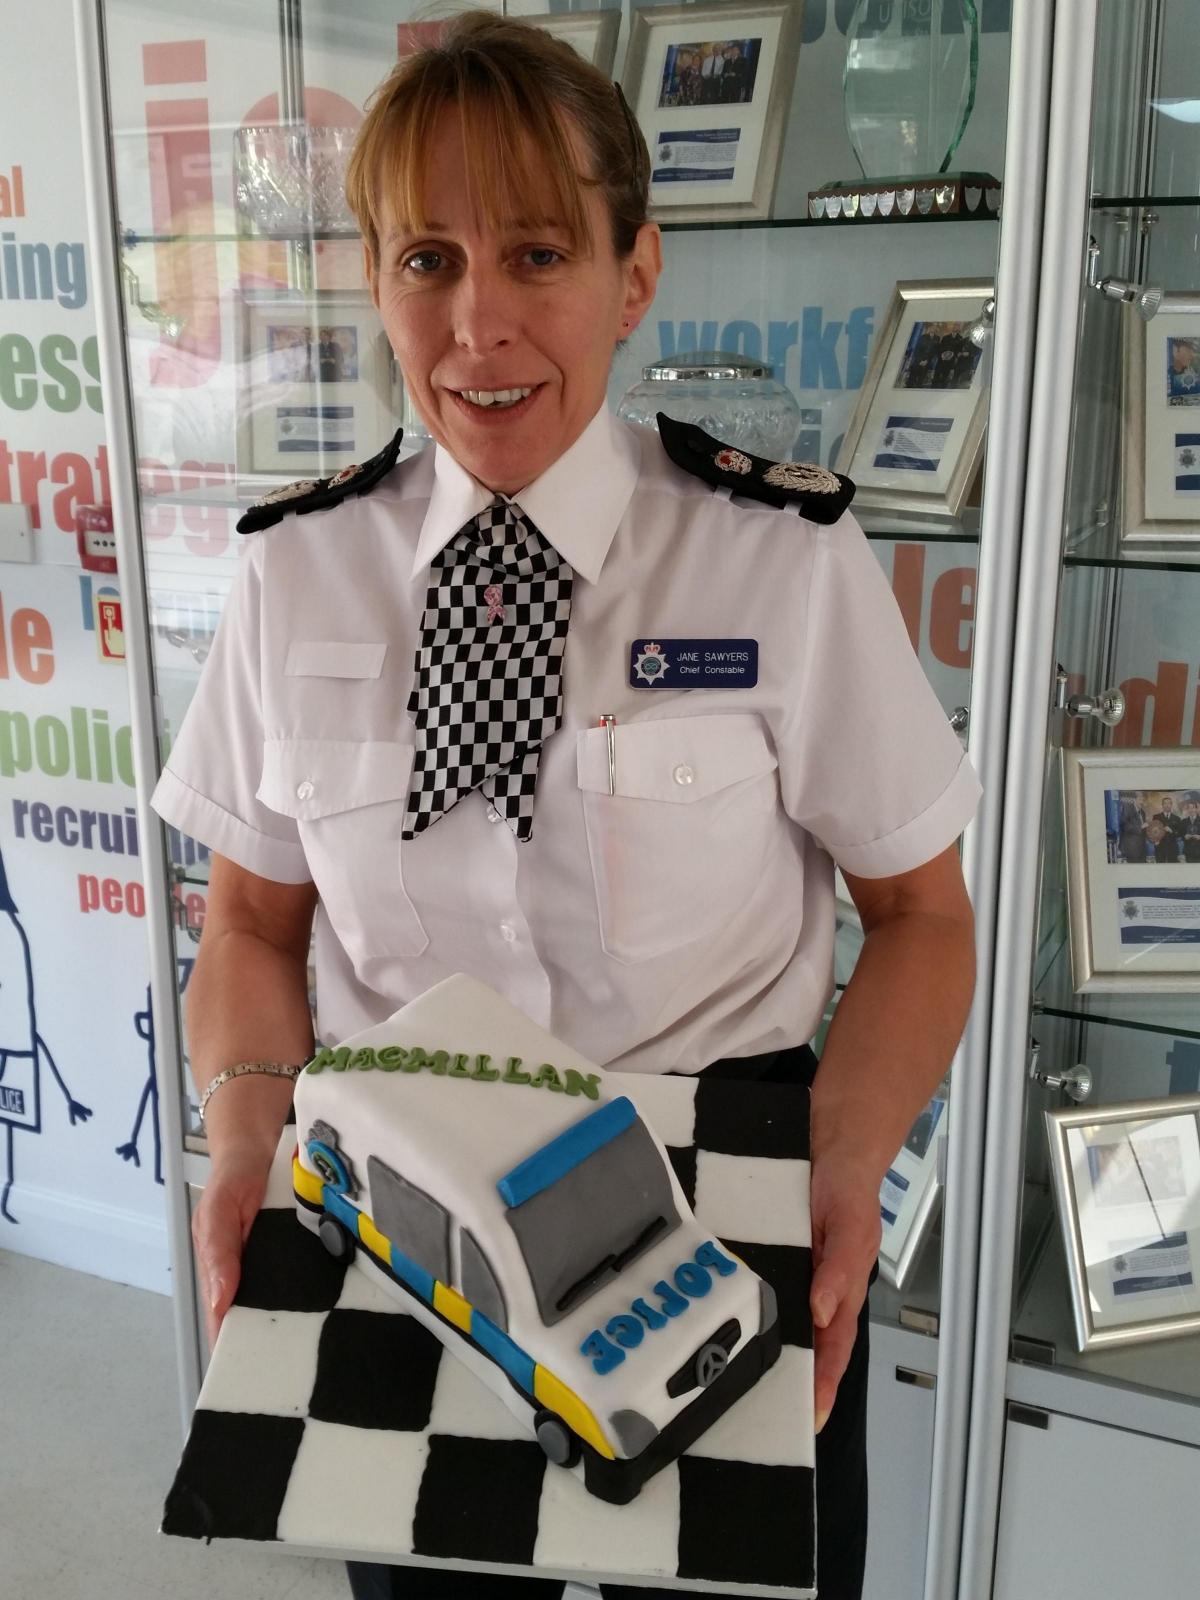 Staffordshire Police's Chief Constable Jane Sawyers with the police car cake the force has raffled off in aid of Macmillan's Coffee Morning appeal. The raffle raised £122.